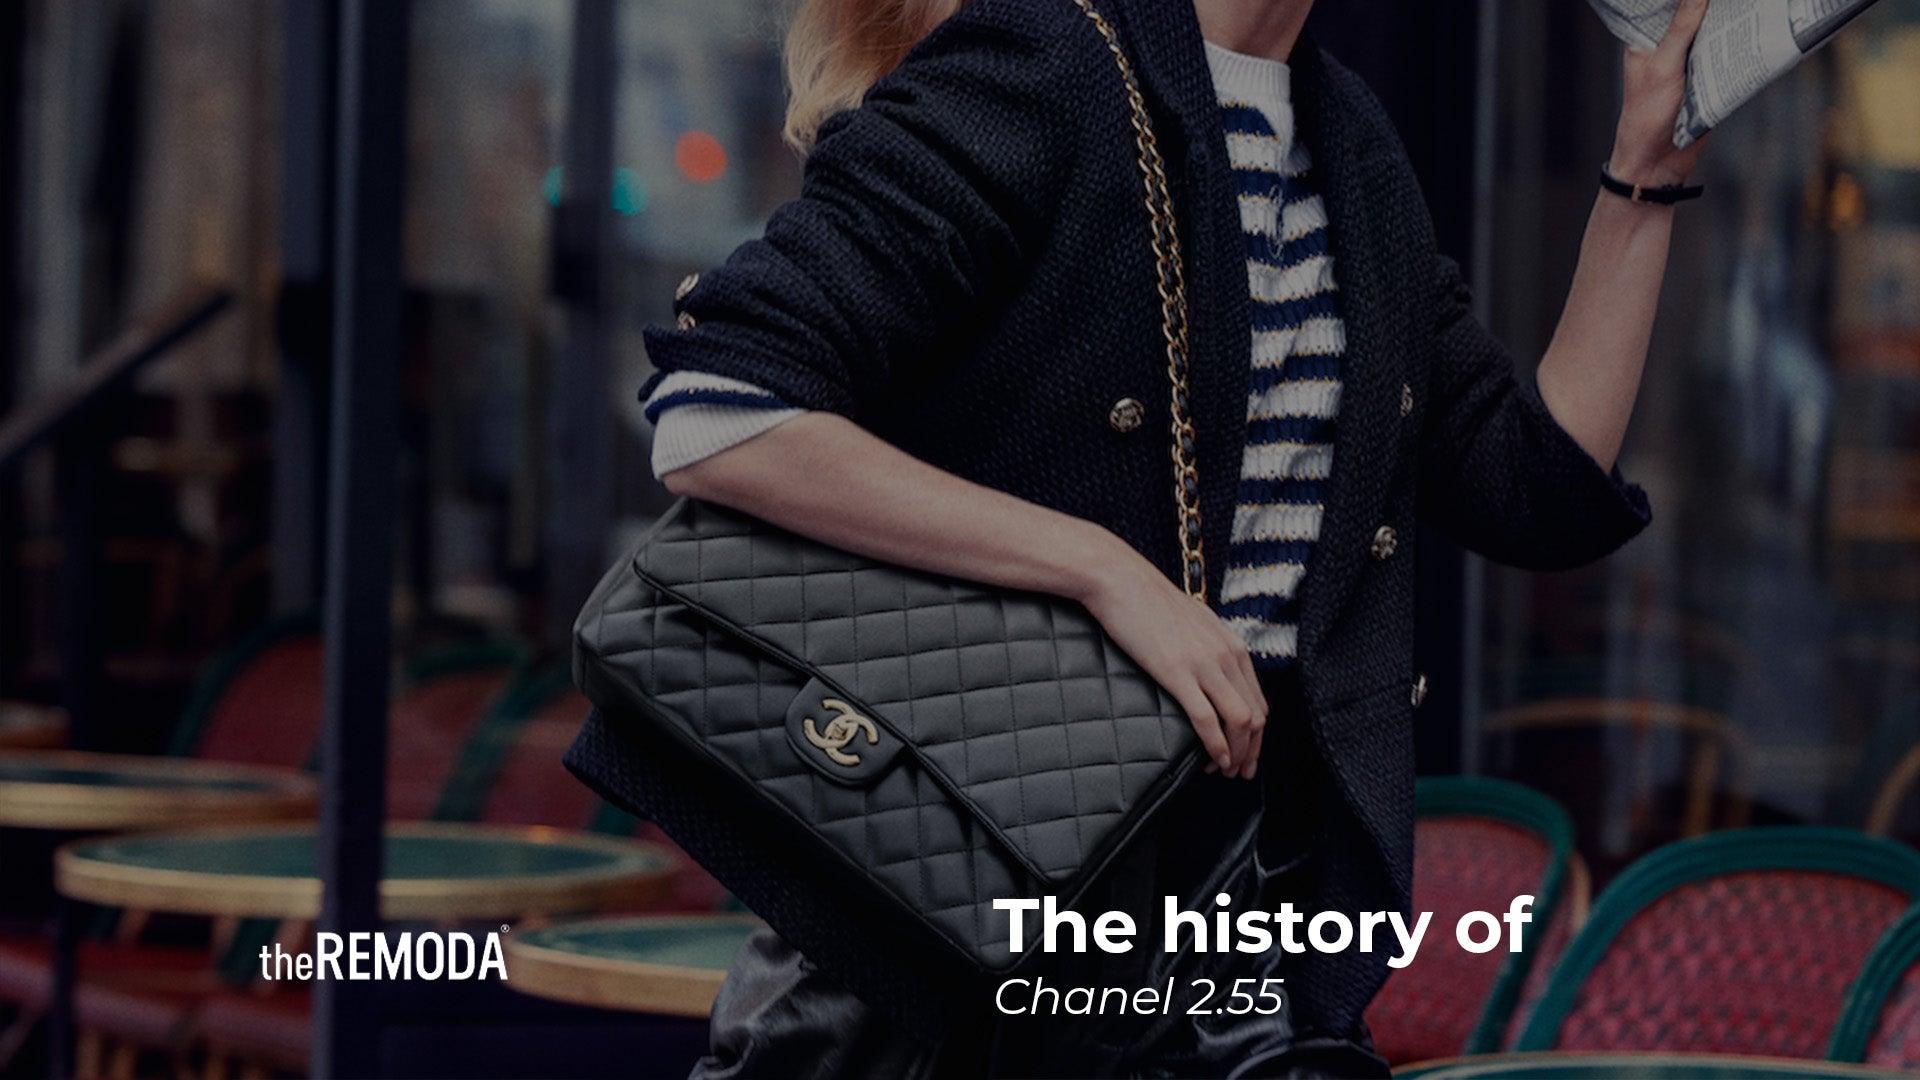 The history of Chanel 2.55 – theREMODA